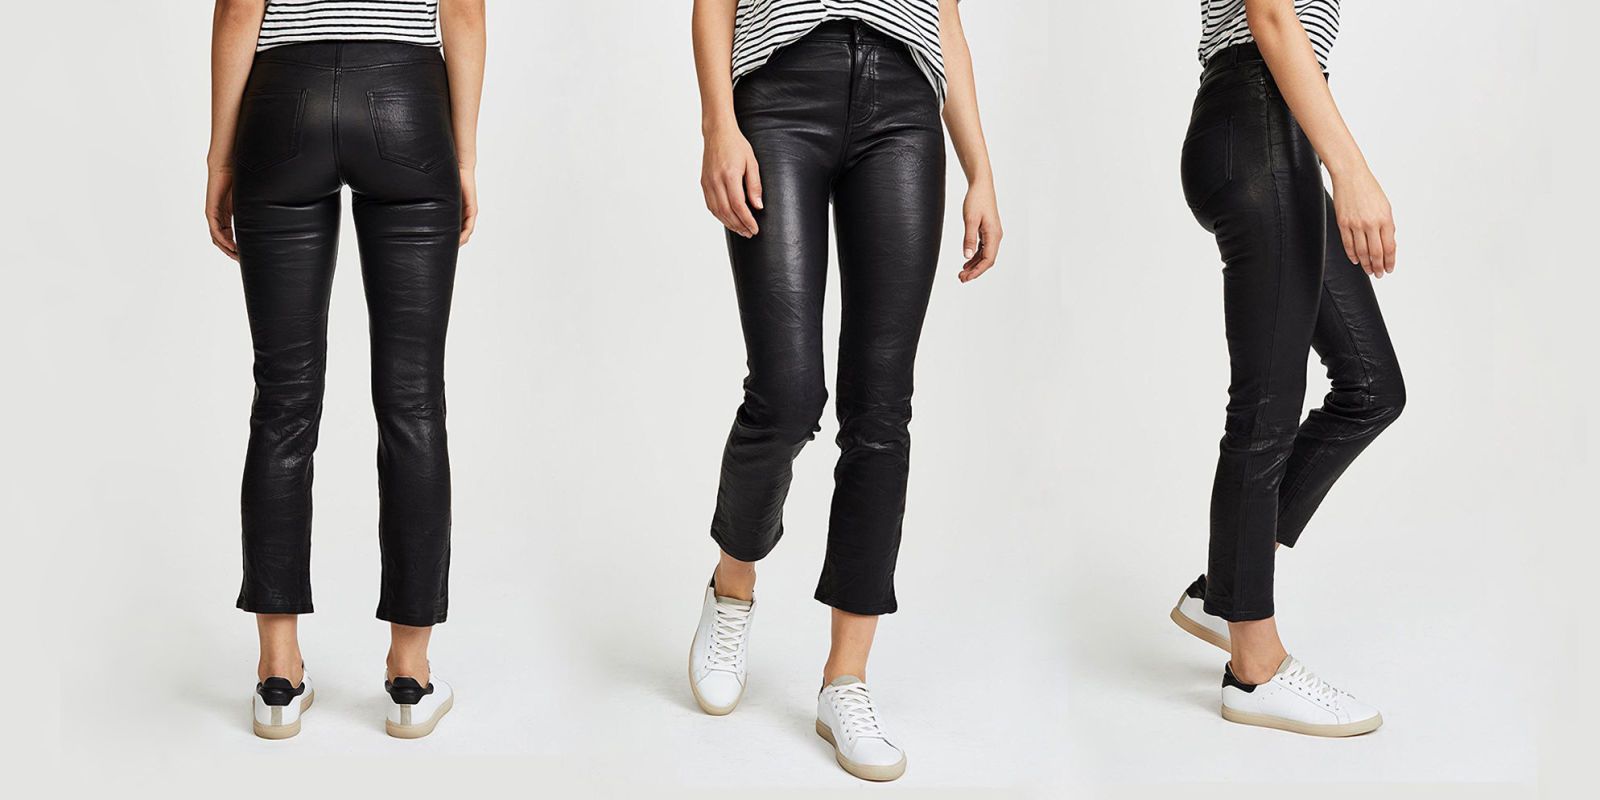 JJXX real leather straight leg trousers in black | ASOS